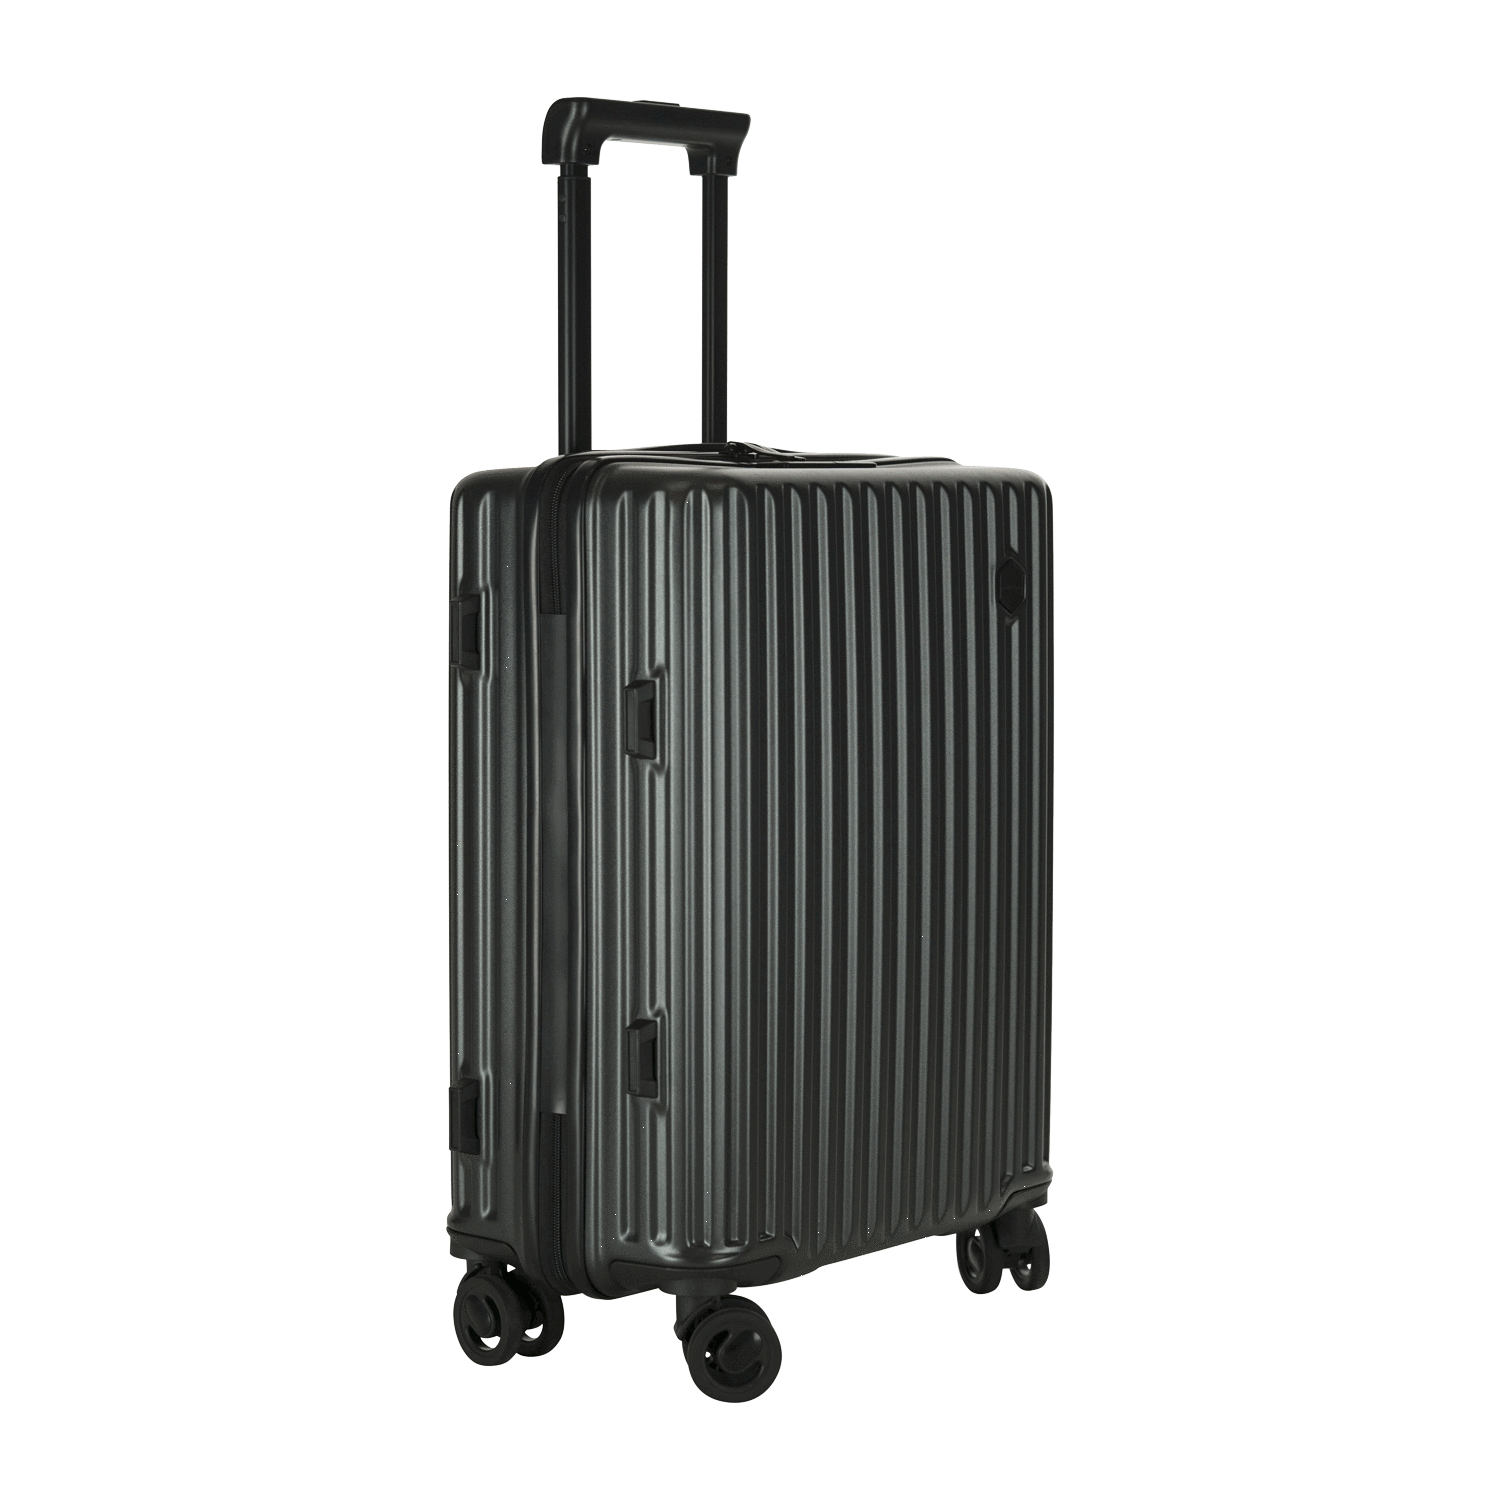 GAIAS Exclusive Manufacturer Travel Alpha Luggage with FingerPrint Scanner